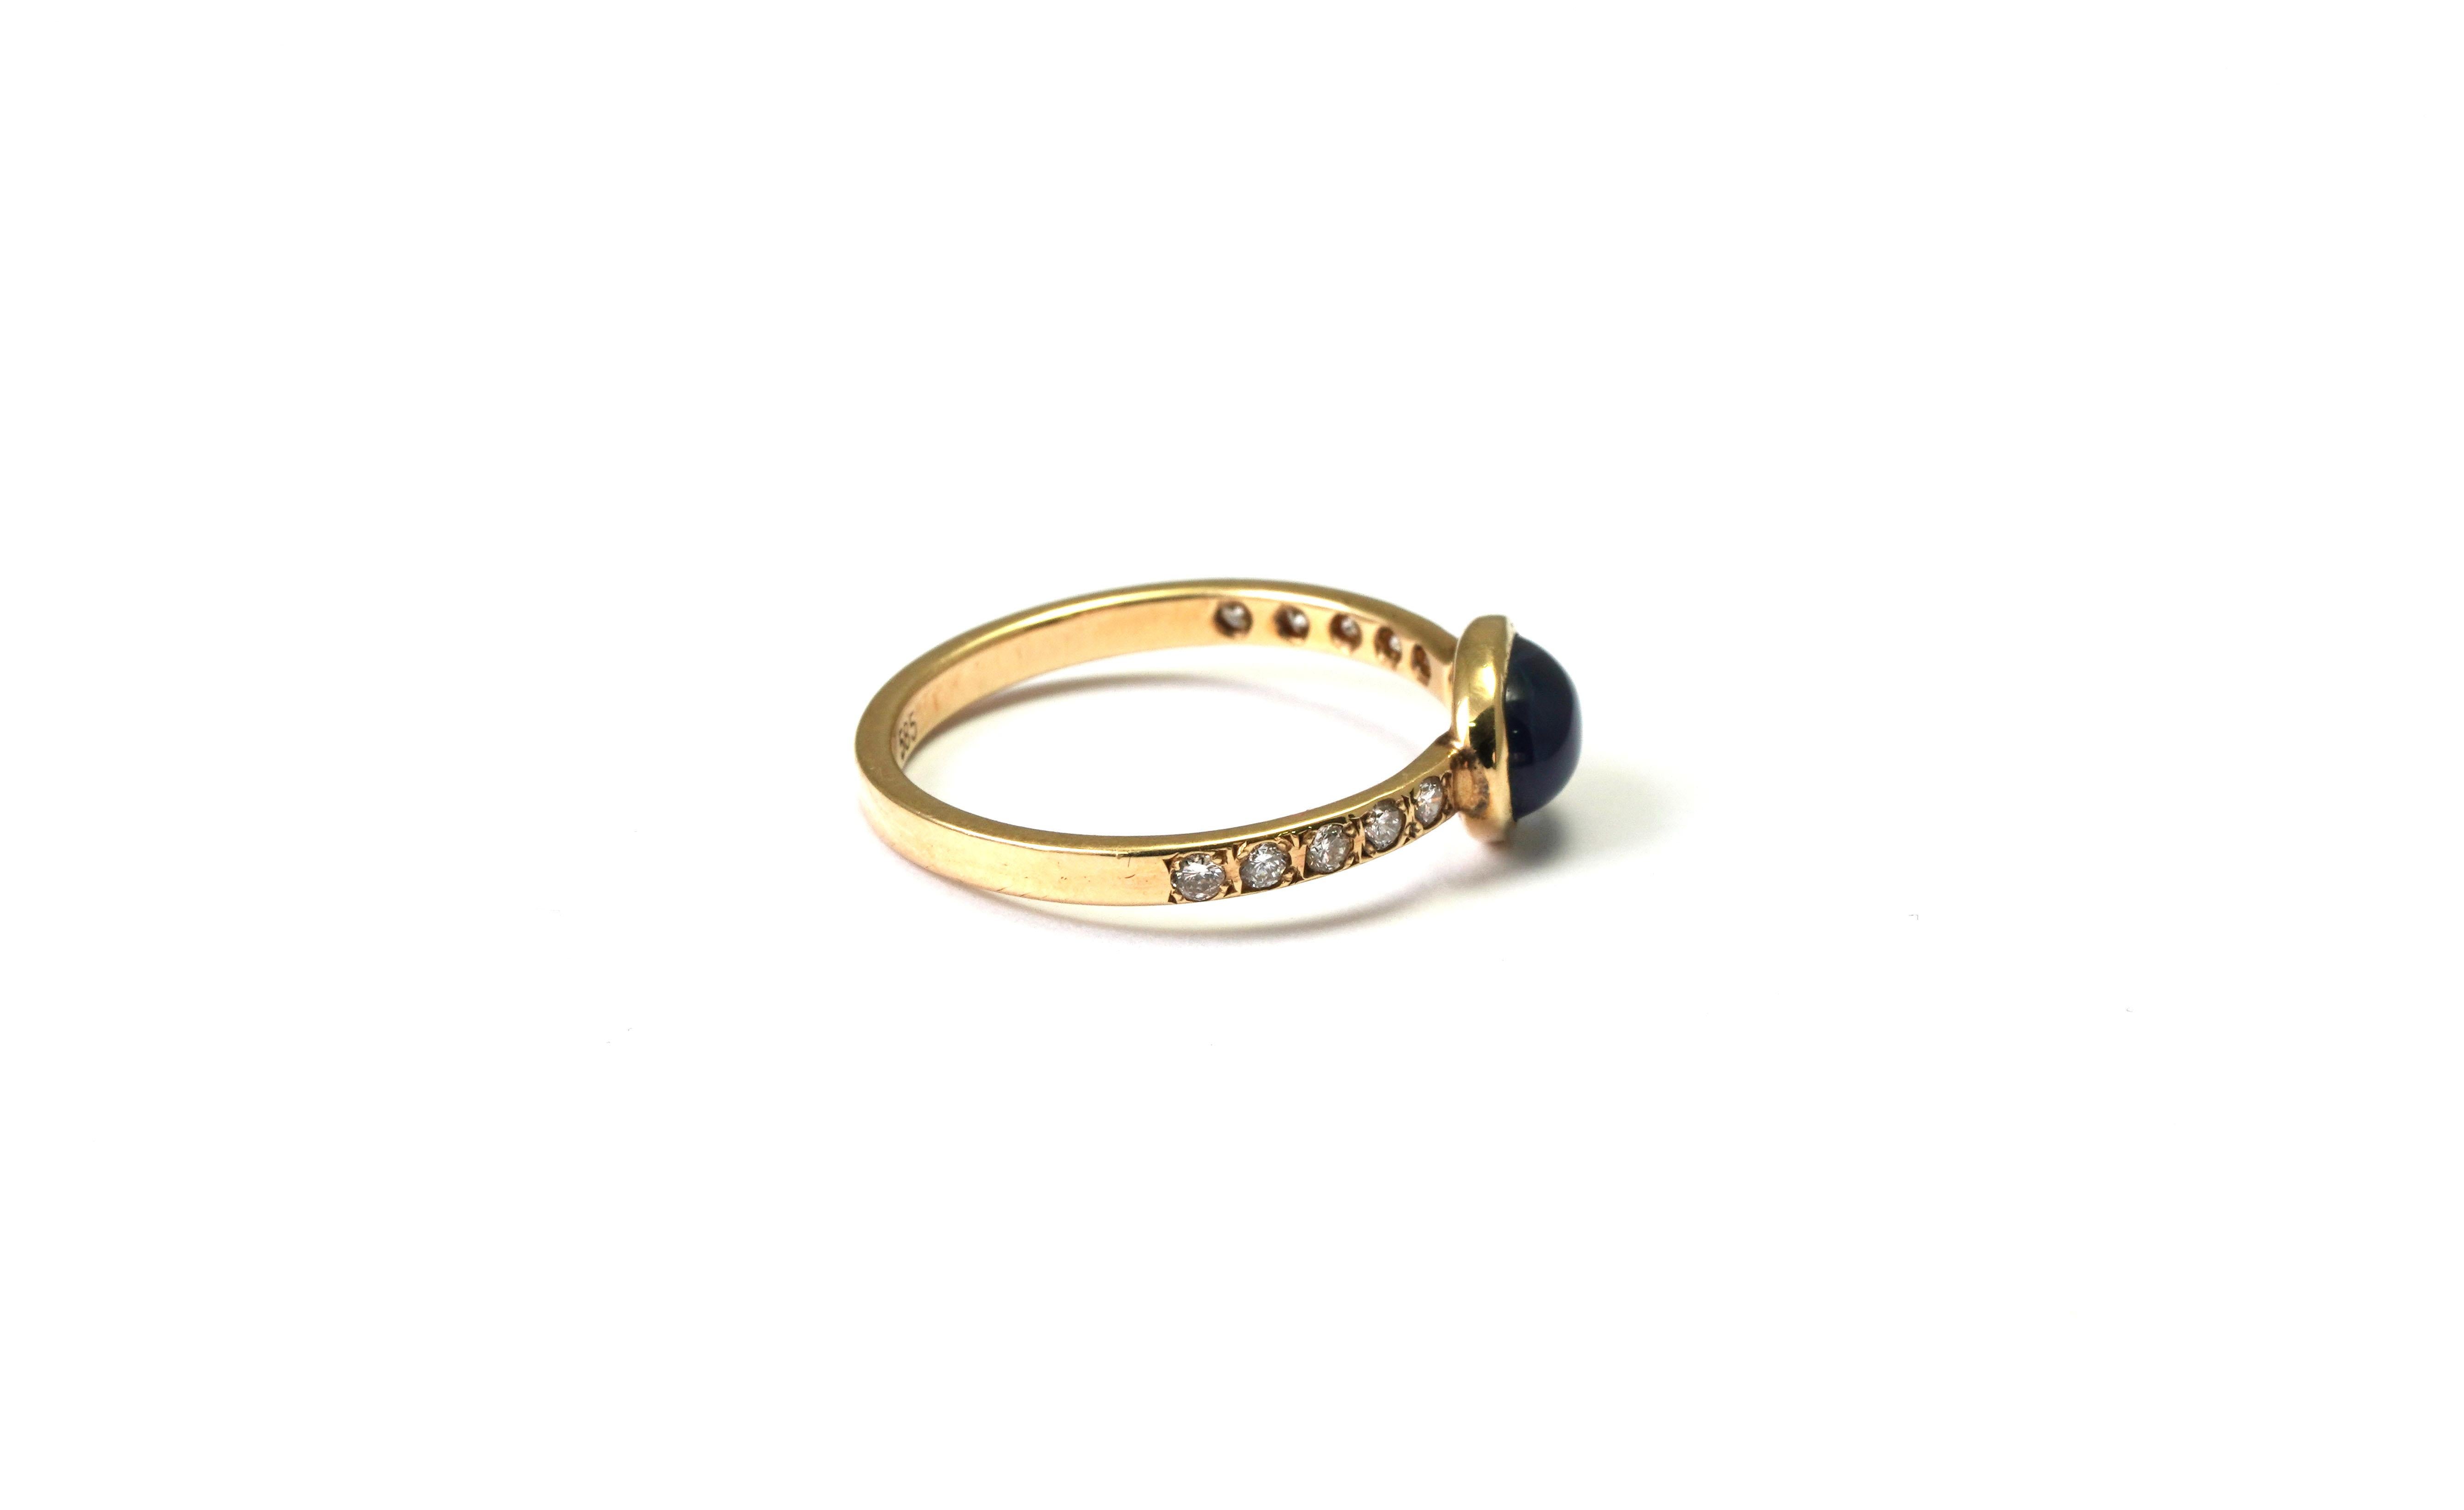 14 kt Gold Ring with Sapphire and Diamonds
Gold color: Yellow
Ring size: 6 1/2 US
Total weight: 1.83 grams

Set with:
- Sapphire
Cut: Cabochon
Color: Blue
Weight: 1.28 carat

- 10 Diamonds of total: 0.15 ct
Cut: Brilliant